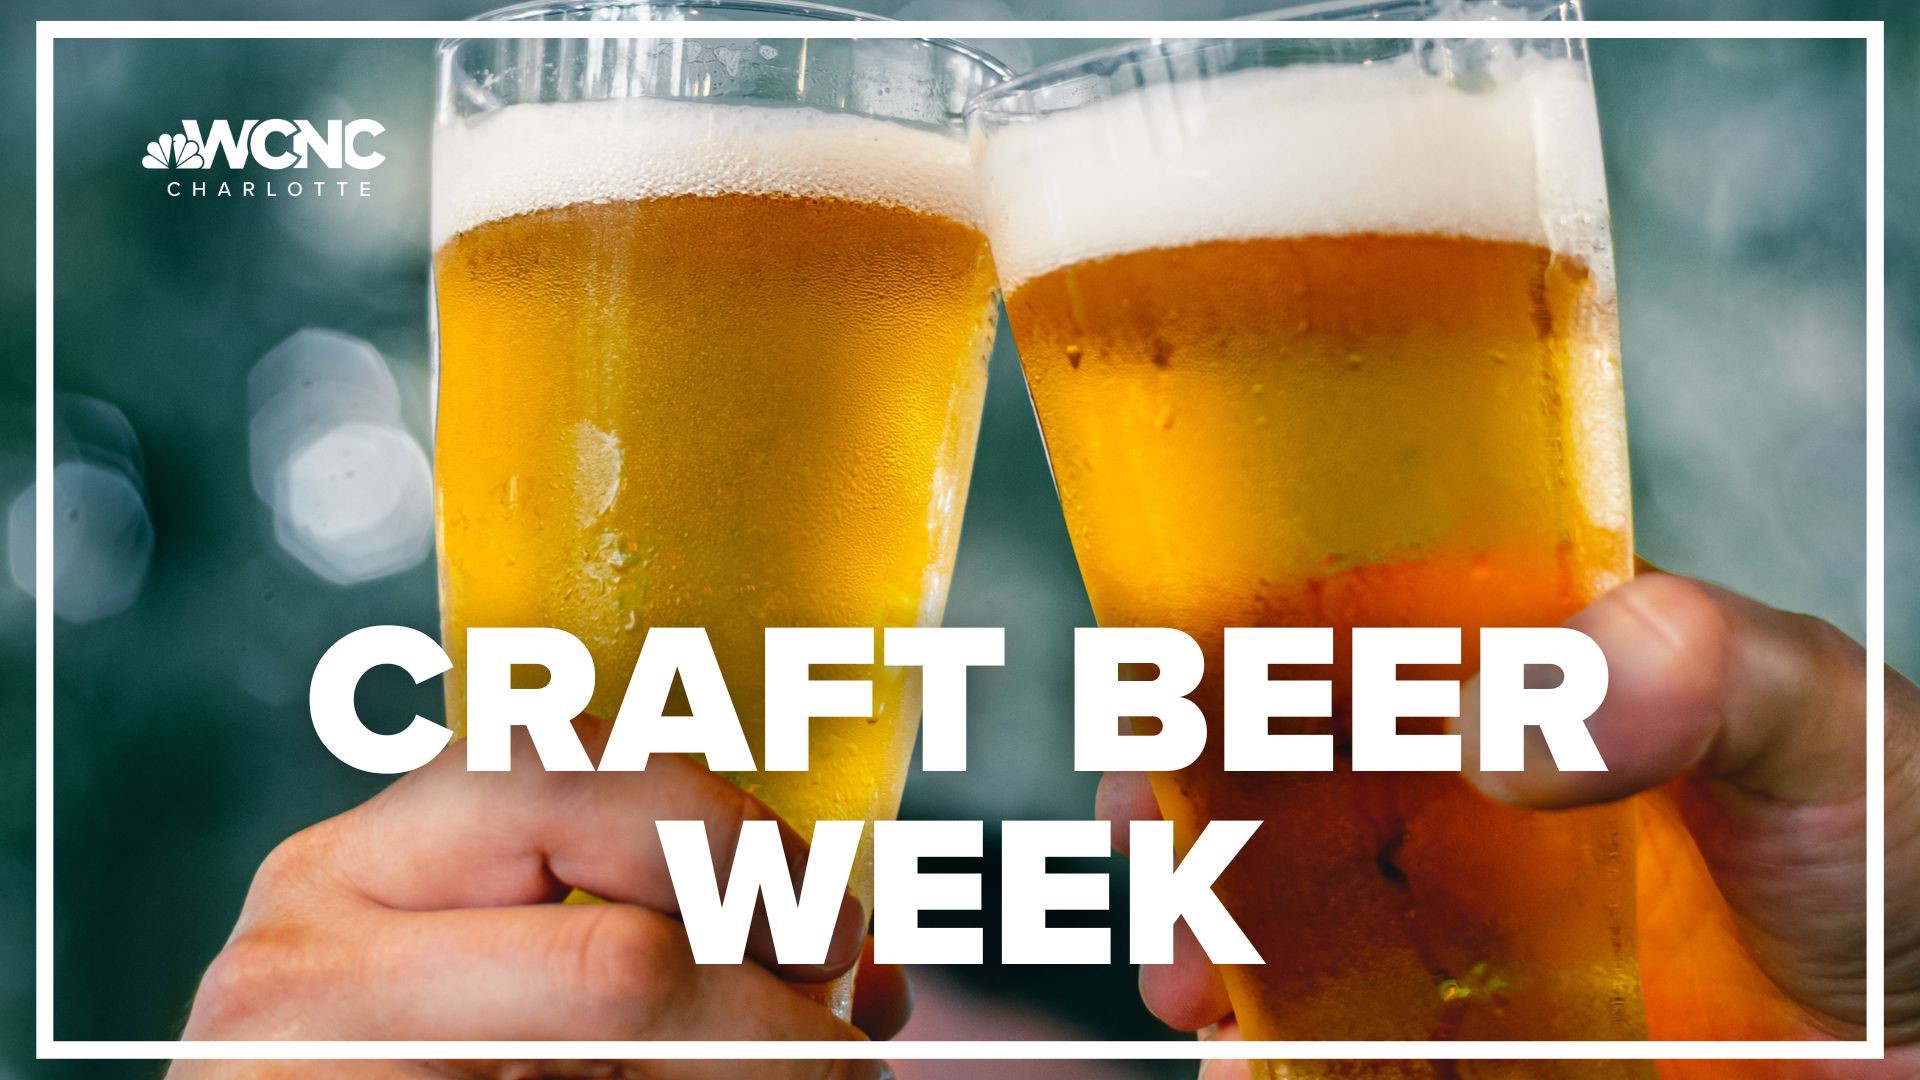 At least 30 local breweries are taking part in a week full of events like beer and food parings, a Halloween bar crawl and more.